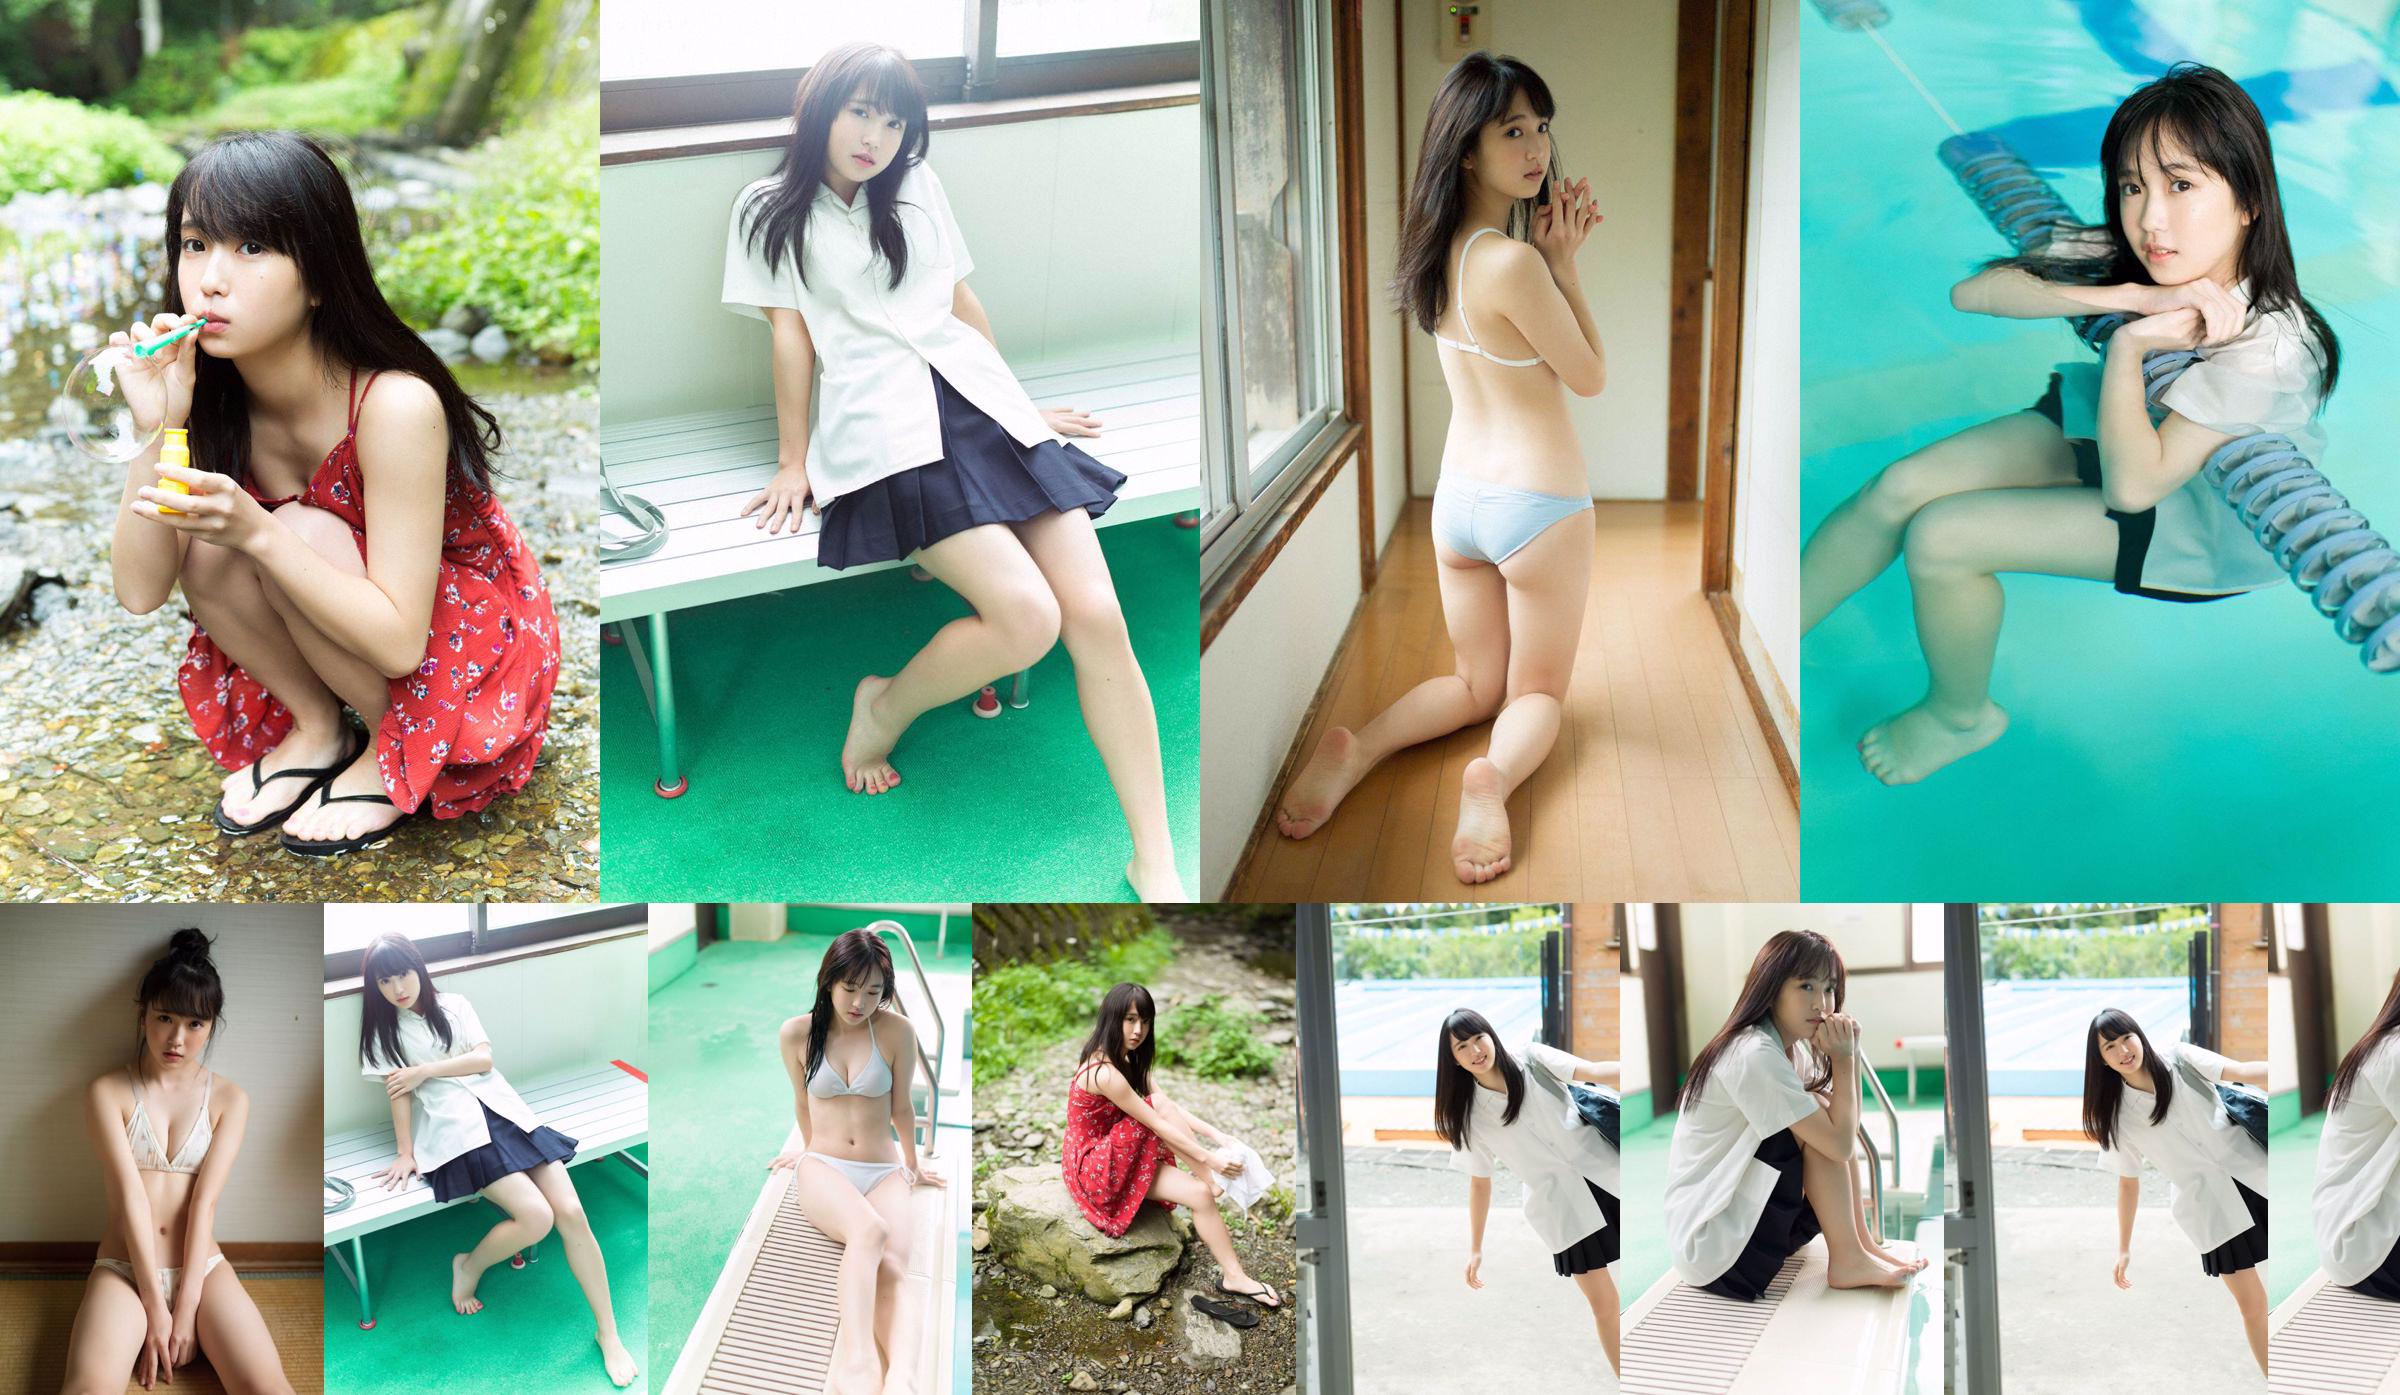 Shiho Fujino << Sommergedächtnis >> [WPB-net] Extra624 No.7a2409 Seite 4